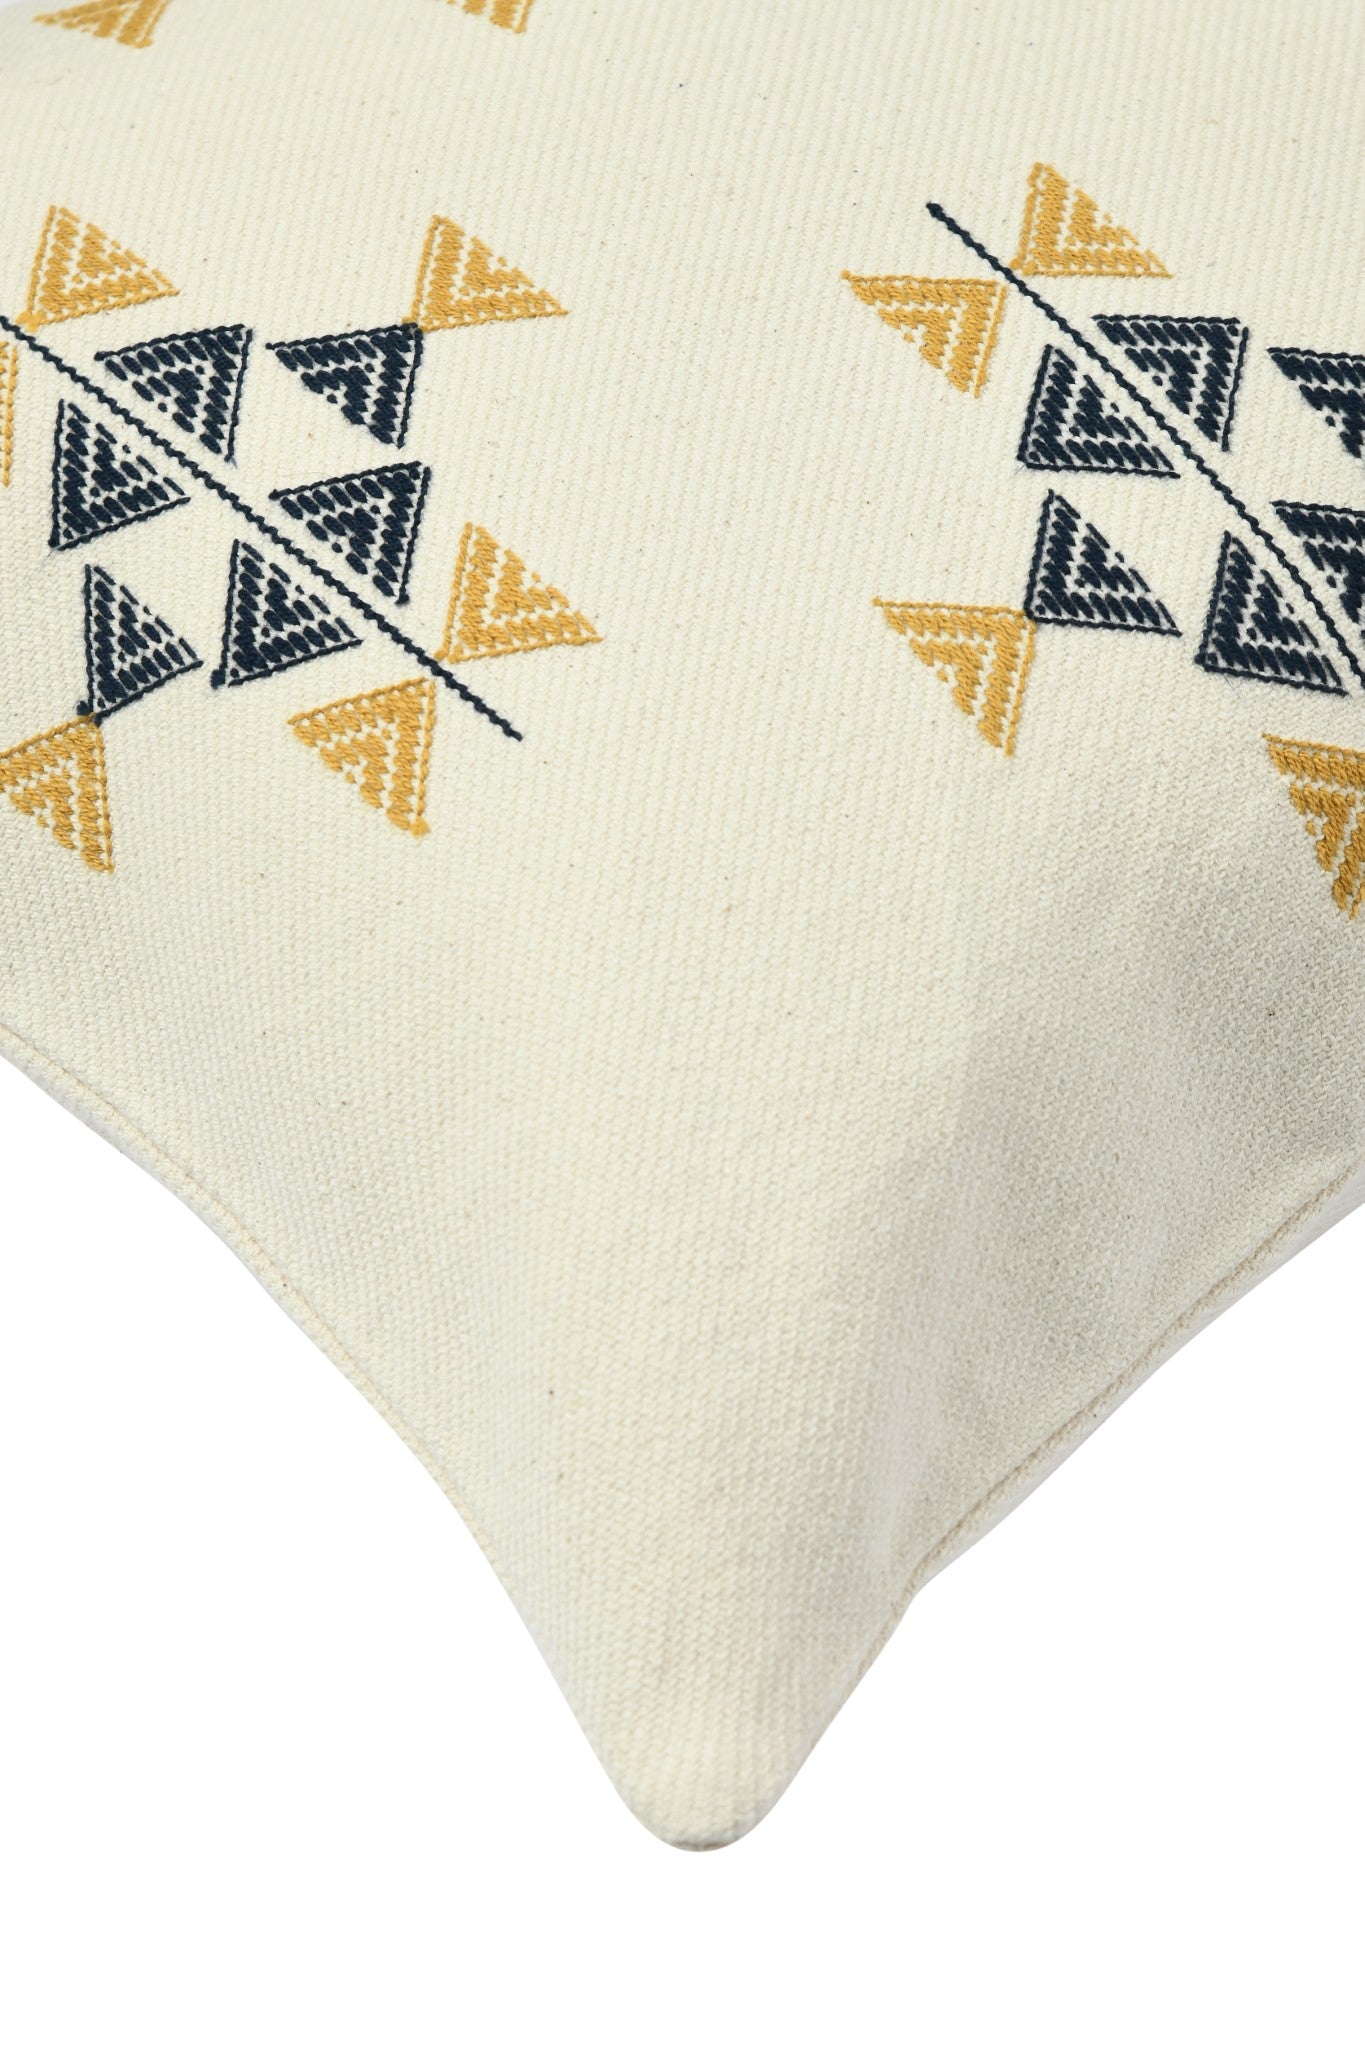 Suti Extra Weft Woven 16X16 Cushion Cover in Natural Colour